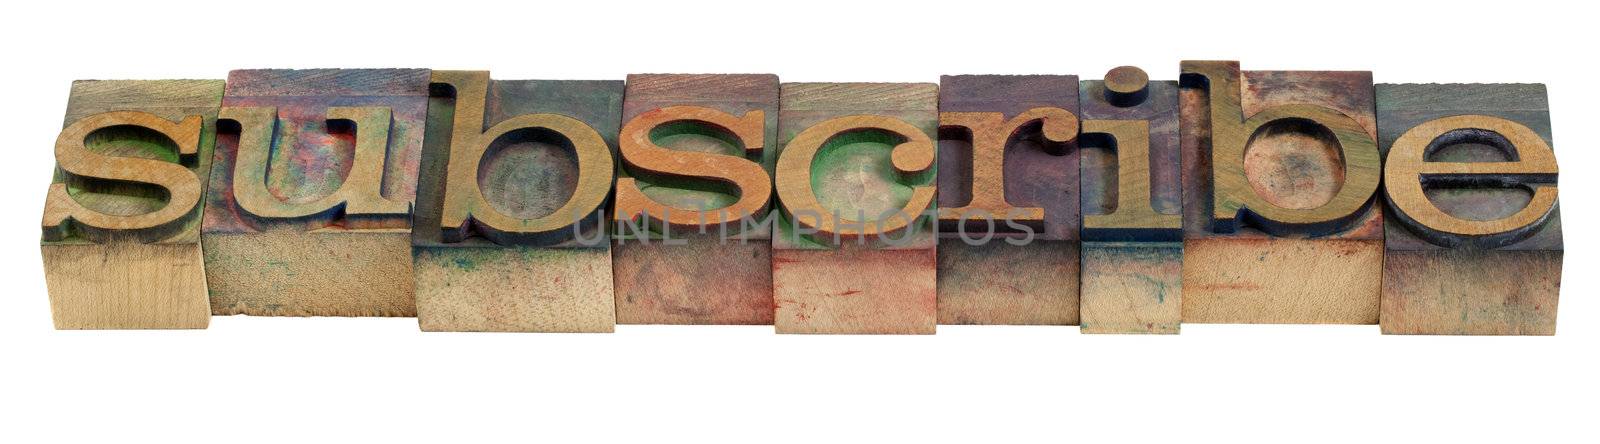 subscribe word in vintage wooden letterpress printing blocks stained by color inks